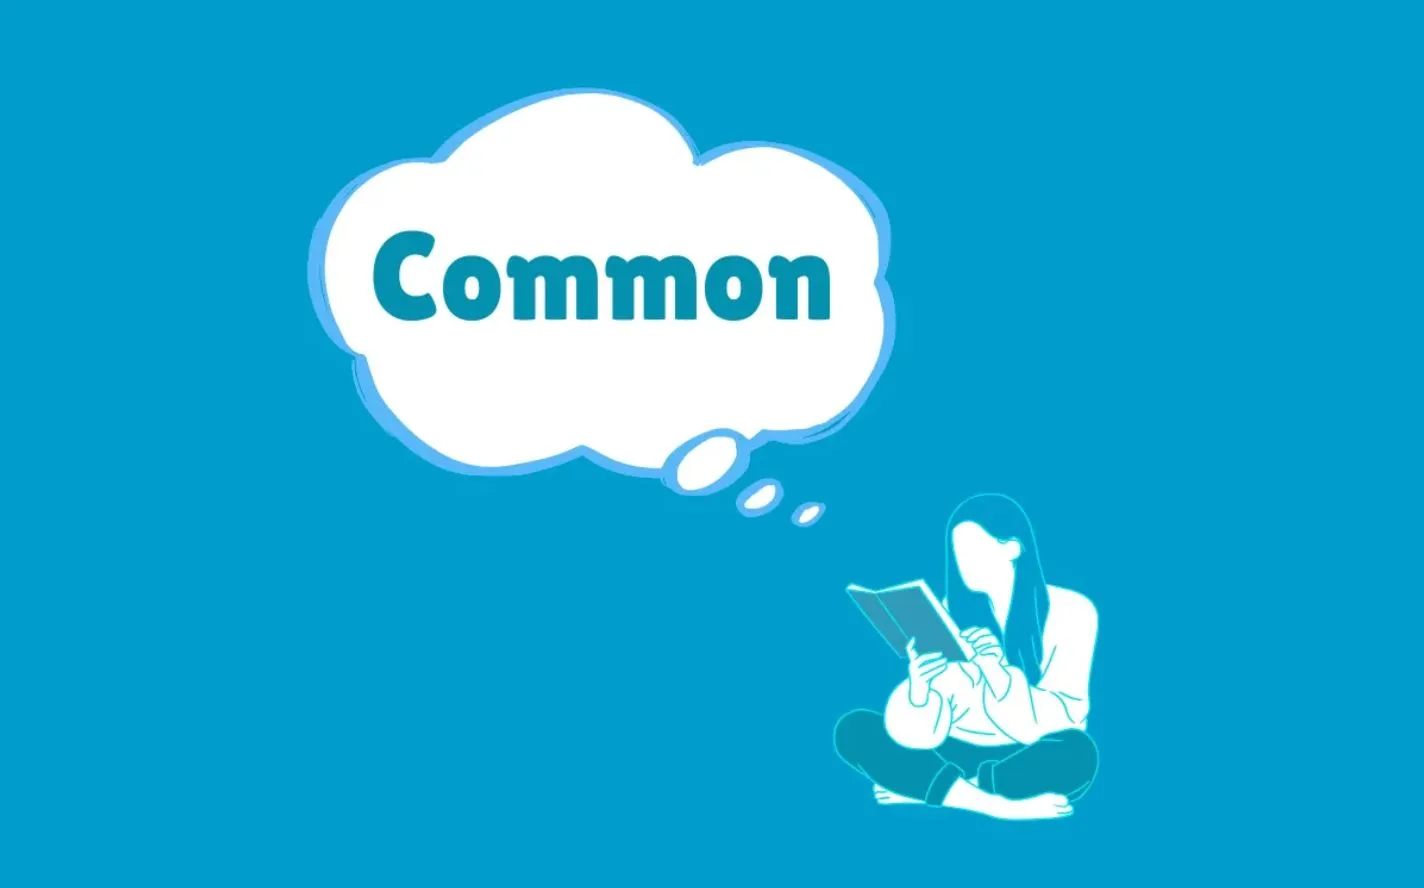 Common - Definition and Usage | Common English words